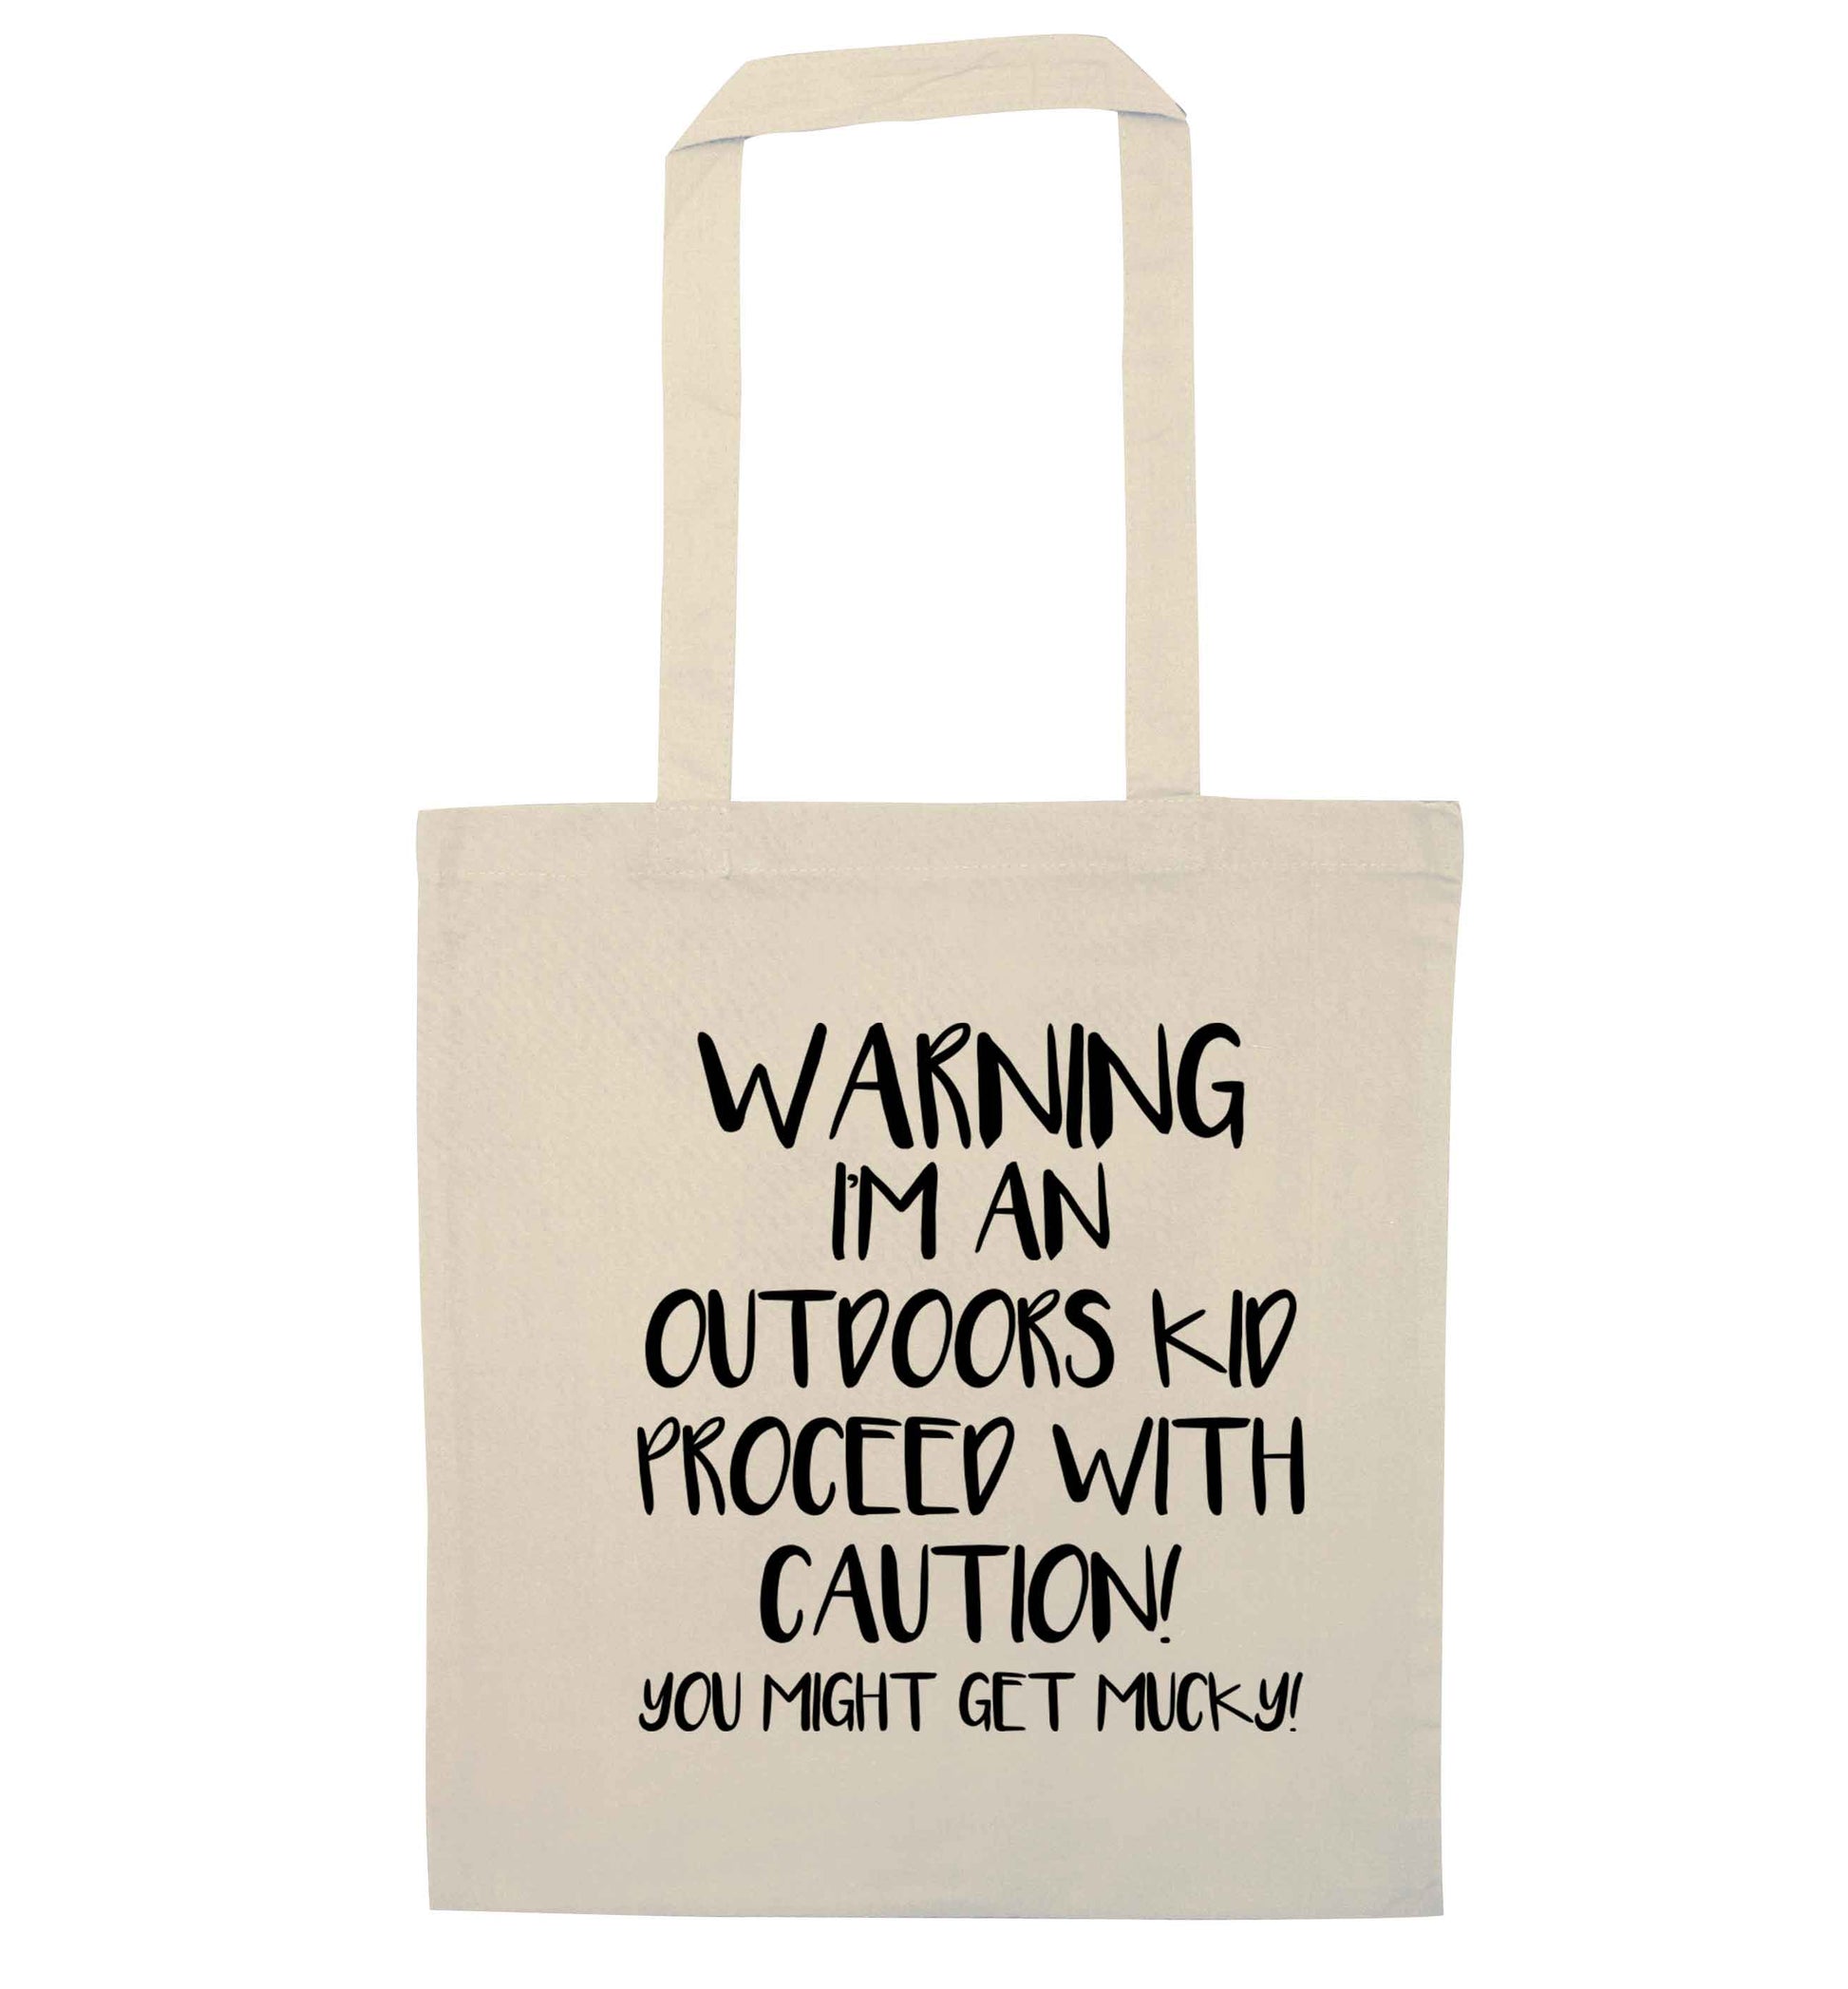 Warning I'm an outdoors kid! Proceed with caution you might get mucky natural tote bag